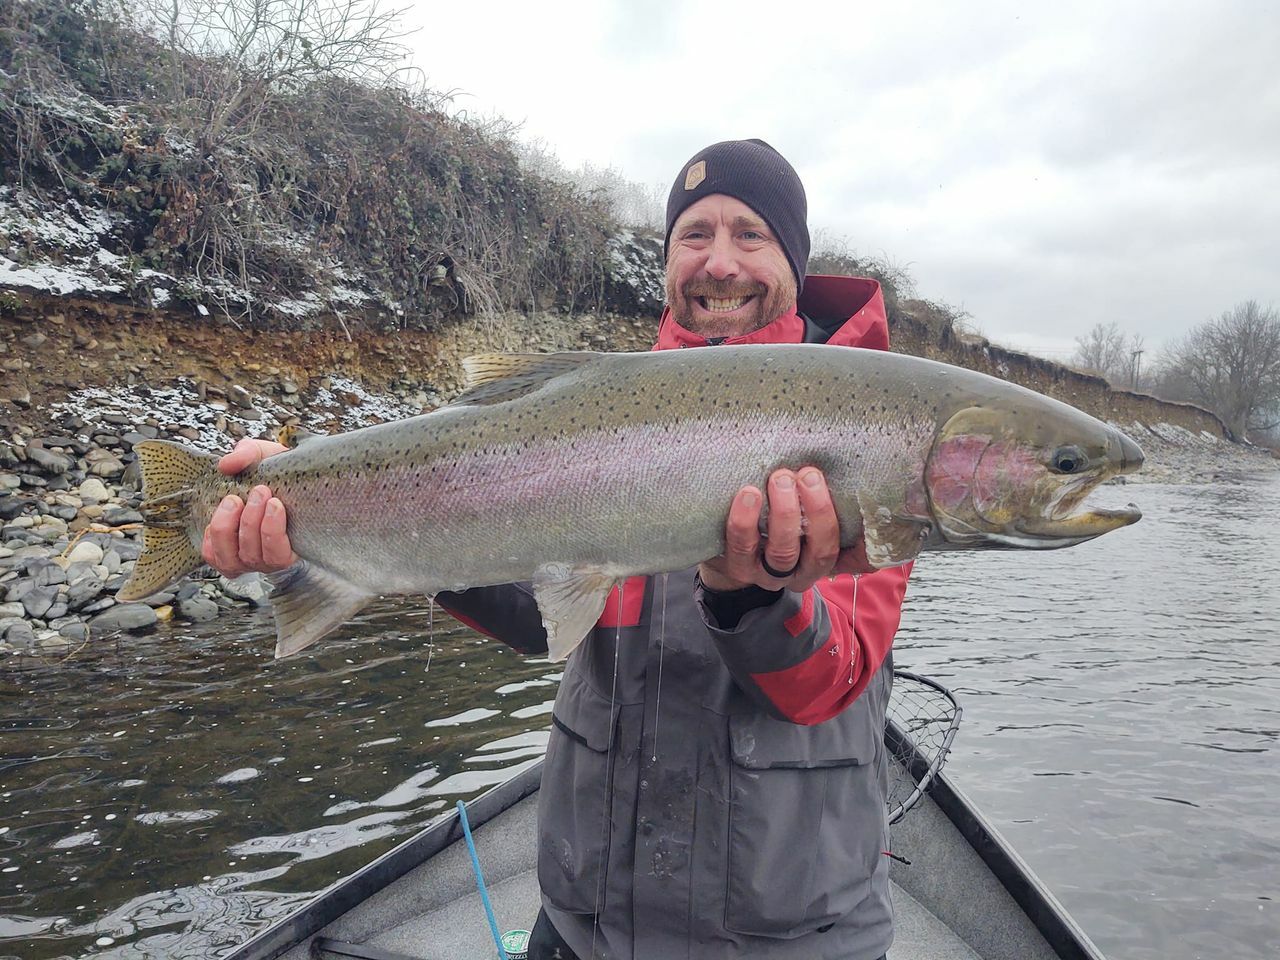 The weather is a bit cold but the Steelhead fishing on the Clearwater River in Idaho is hot! 